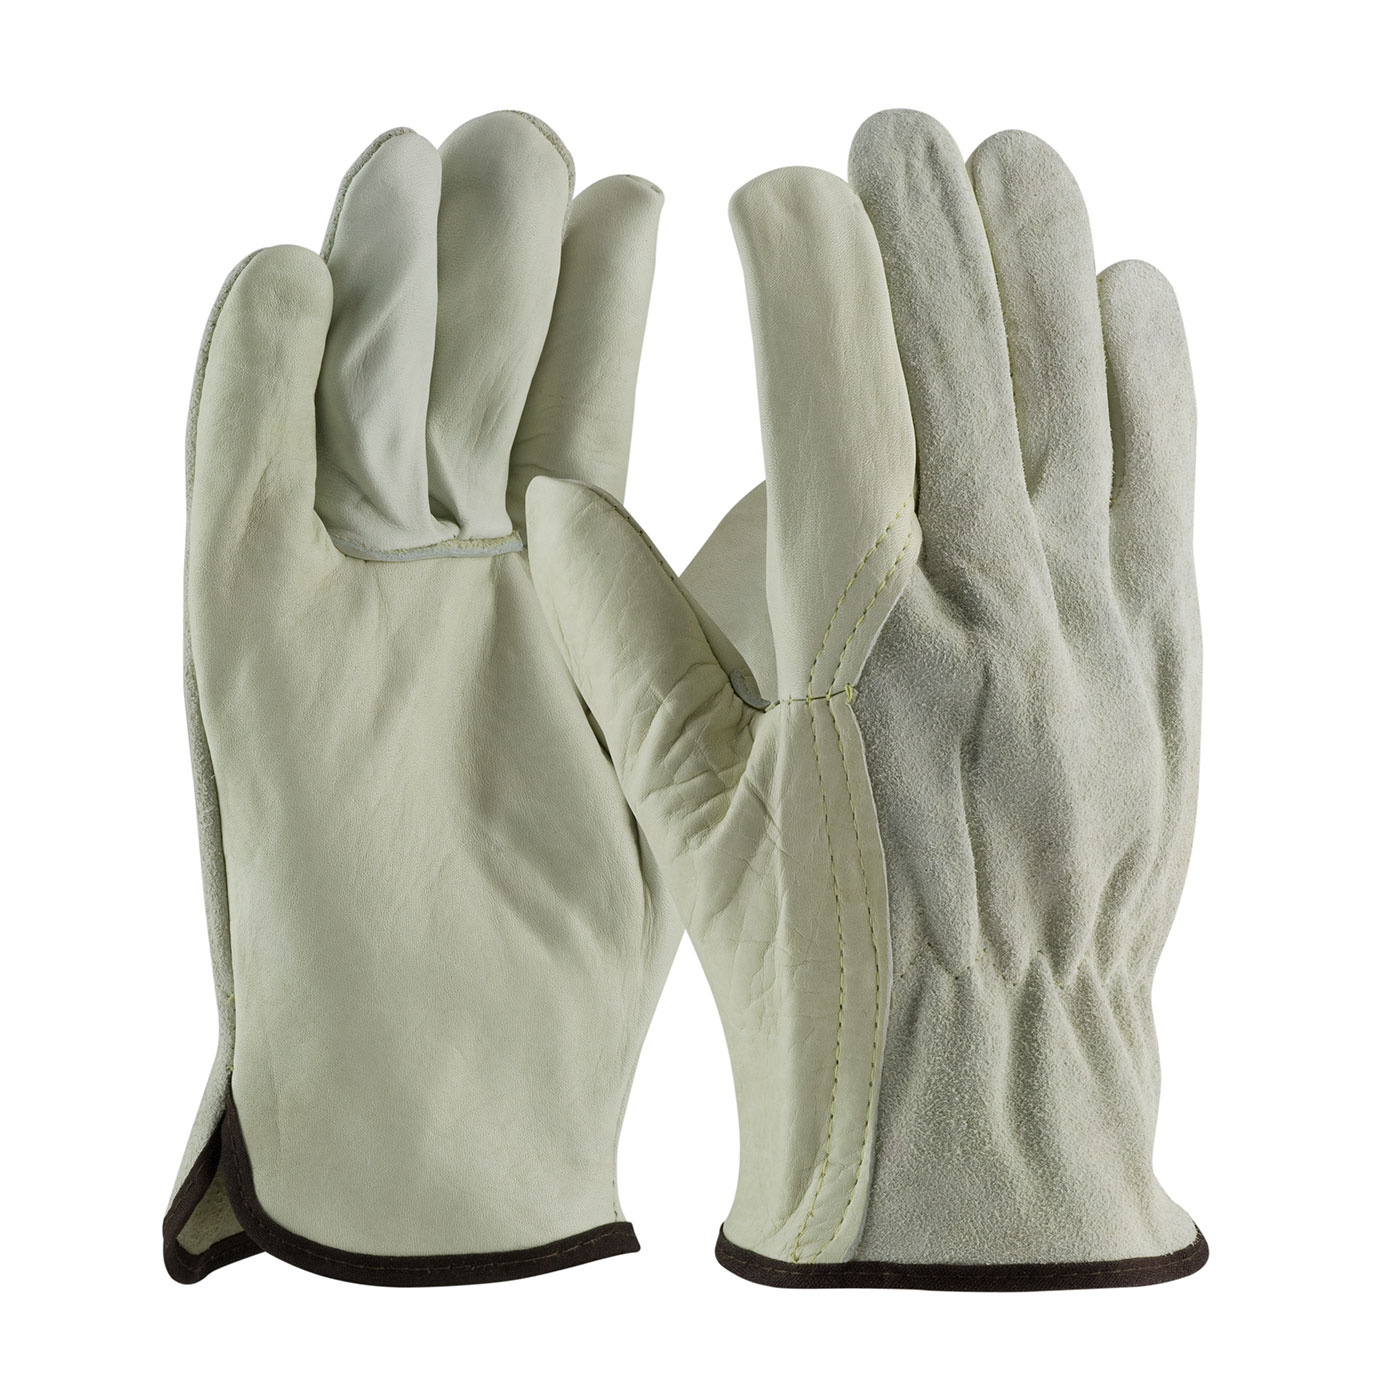 PIP 68-162SB/L Regular Grade Top Grain Drivers Glove with Shoulder Split Cowhide Leather Back and Kevlar Stitching - Wing Thumb - Large PID-68 1625B/L